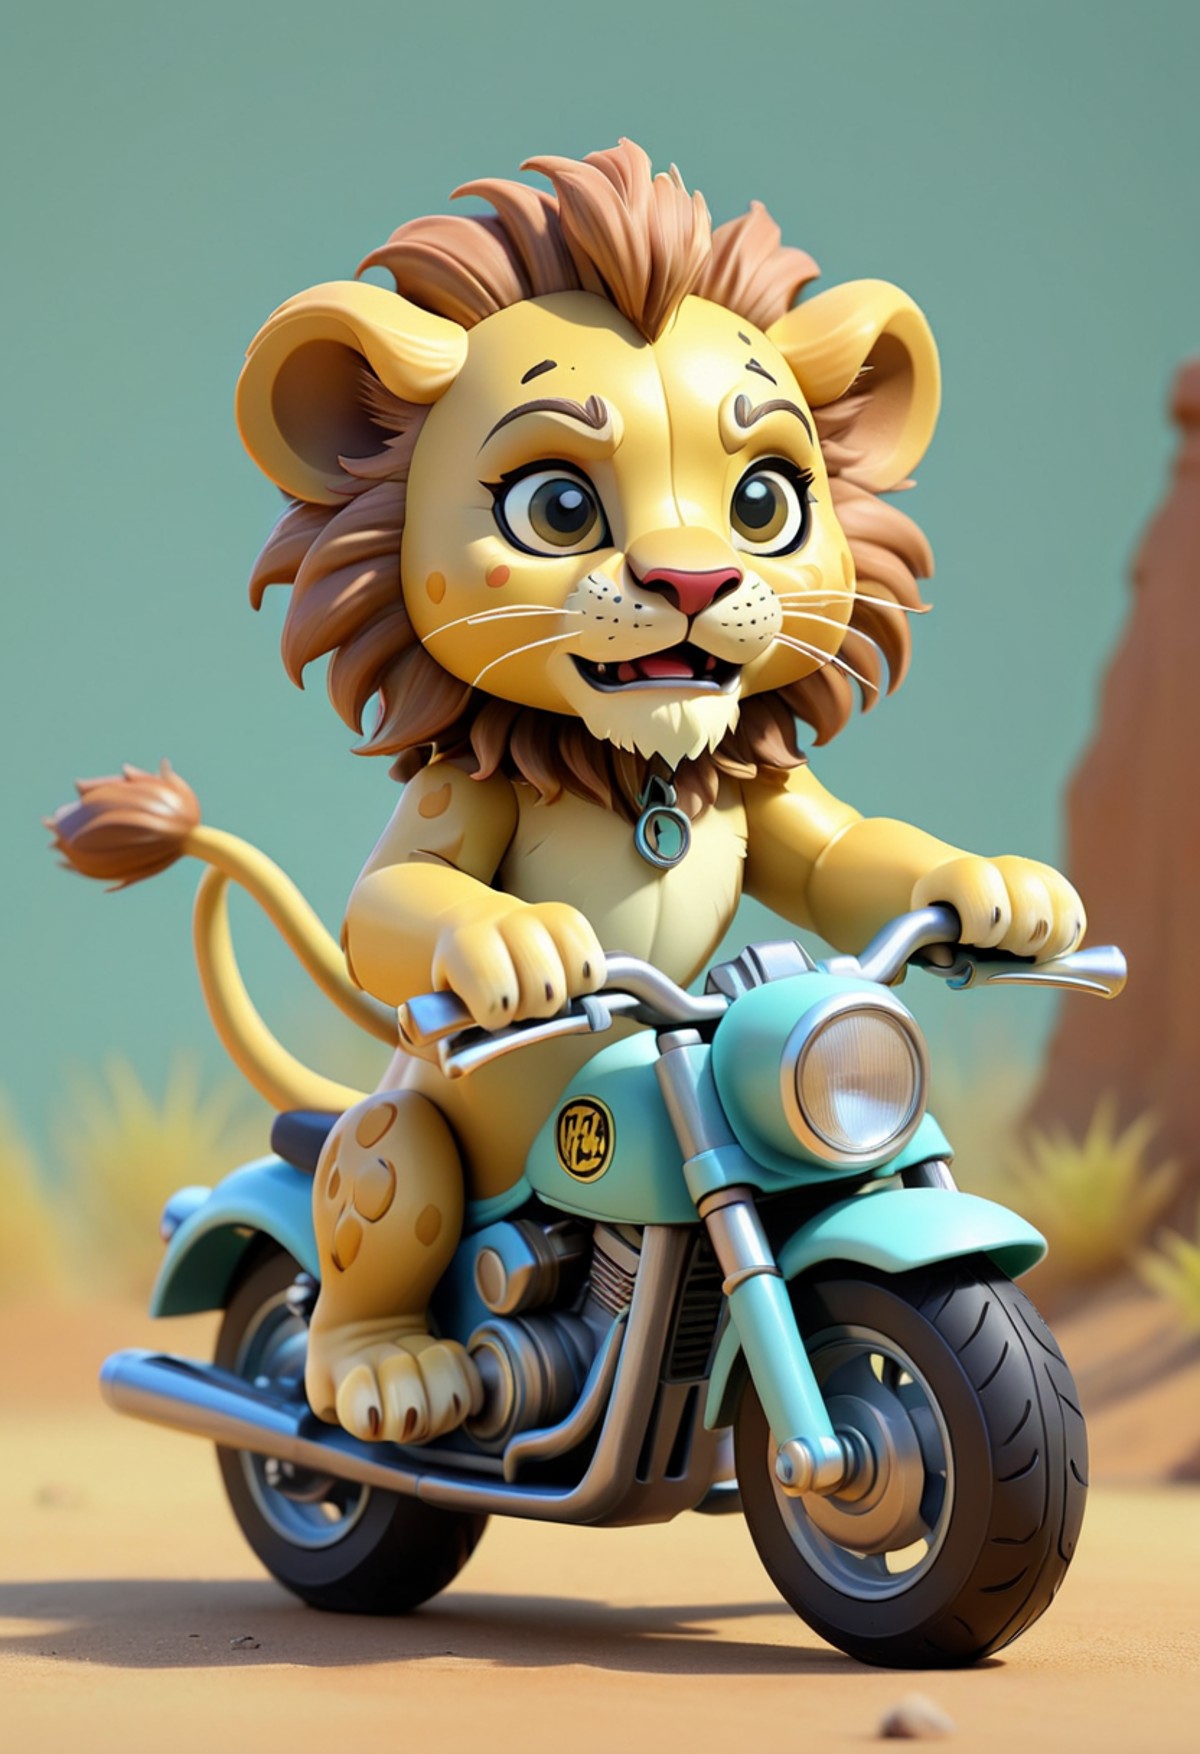 miniture, tiny cute lion toy, riding motorbike, plastic texture, soft smooth lighting, soft pastel colors, skottie young, ...